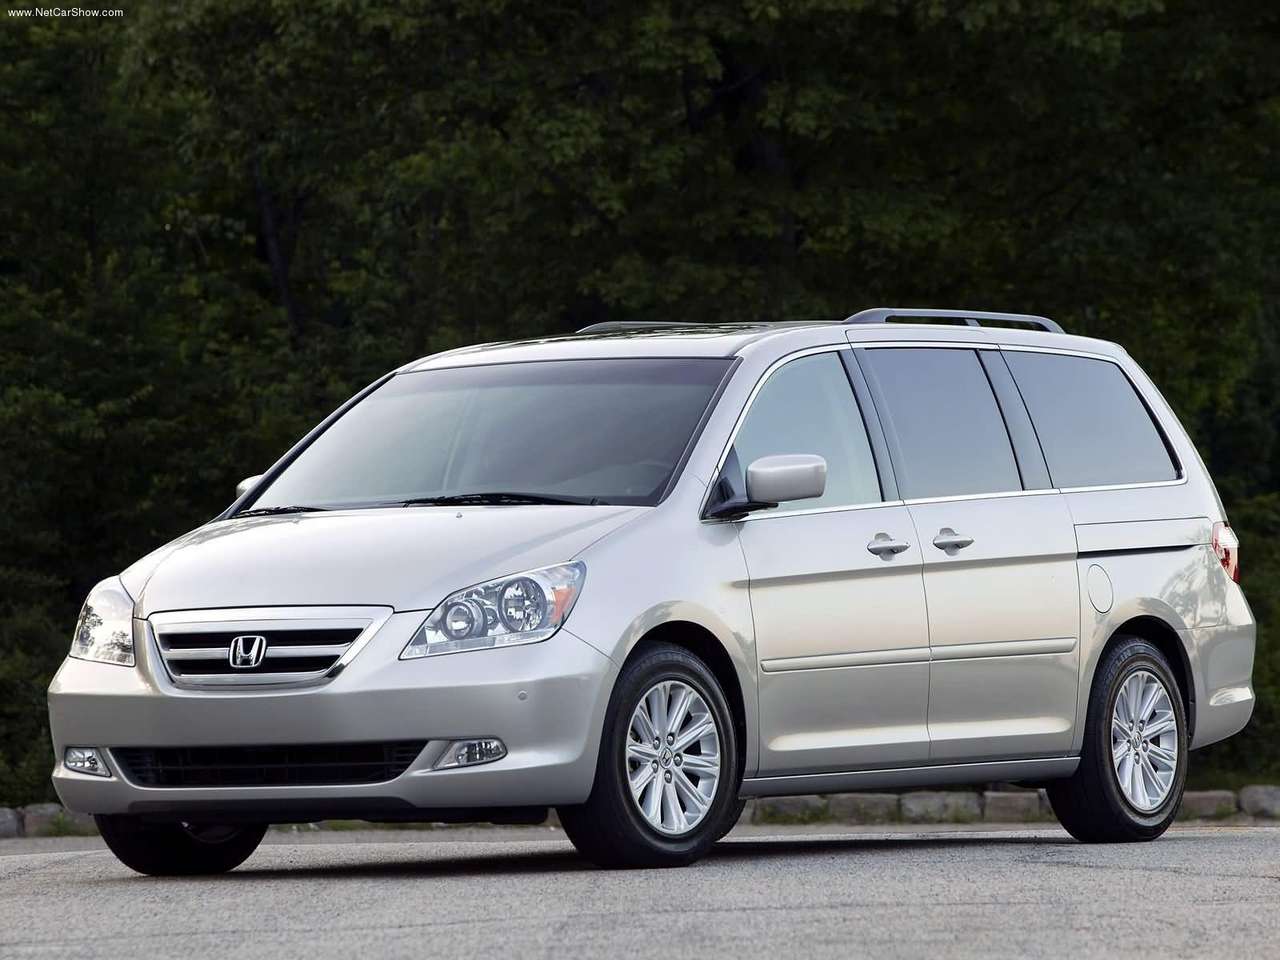 2005 Honda odyssey touring standard features #6